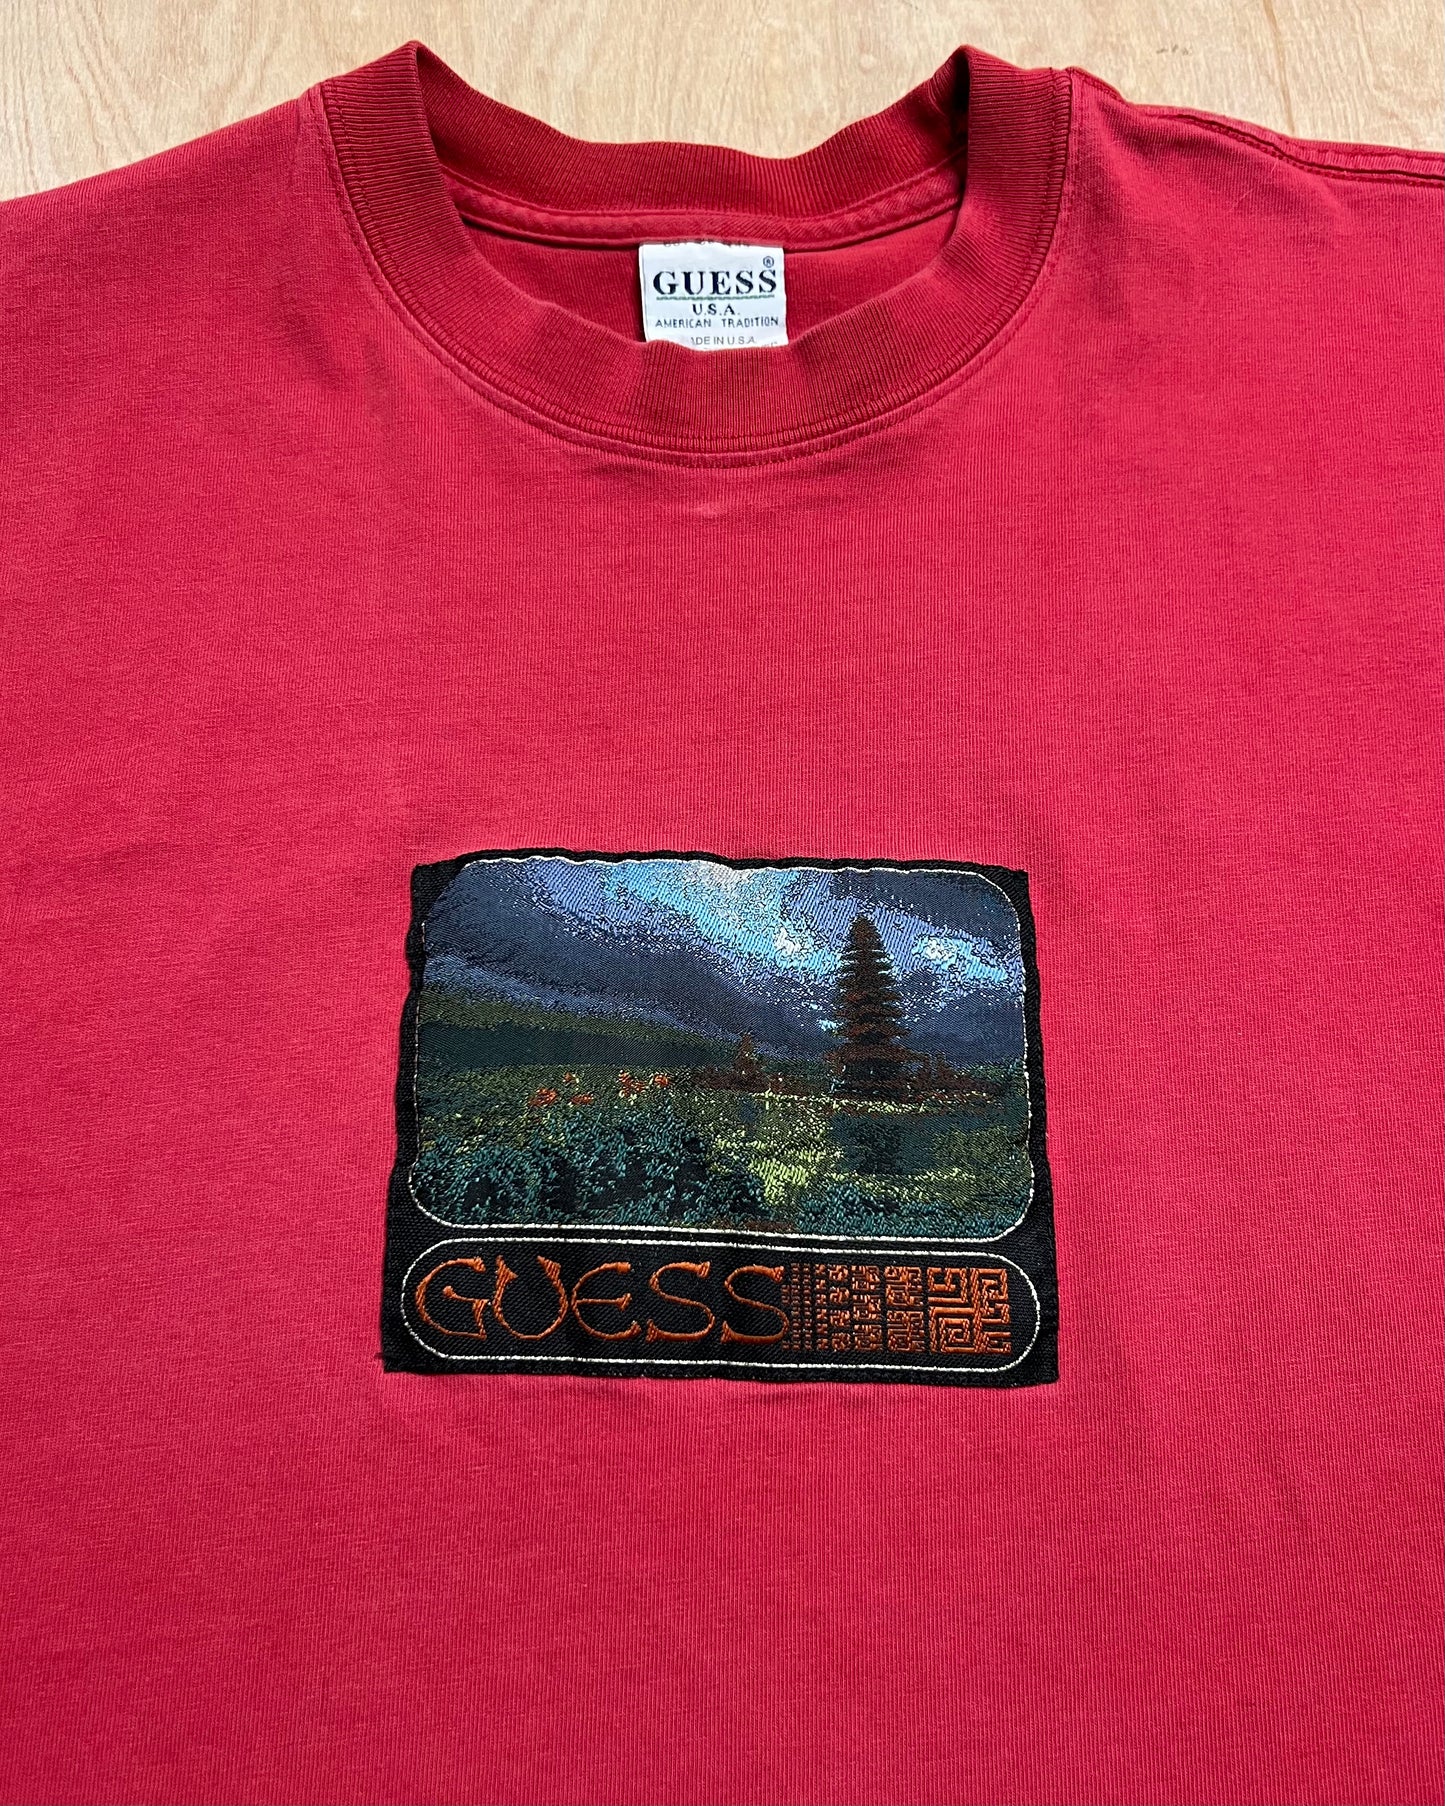 Vintage Guess USA Patch T-Shirt